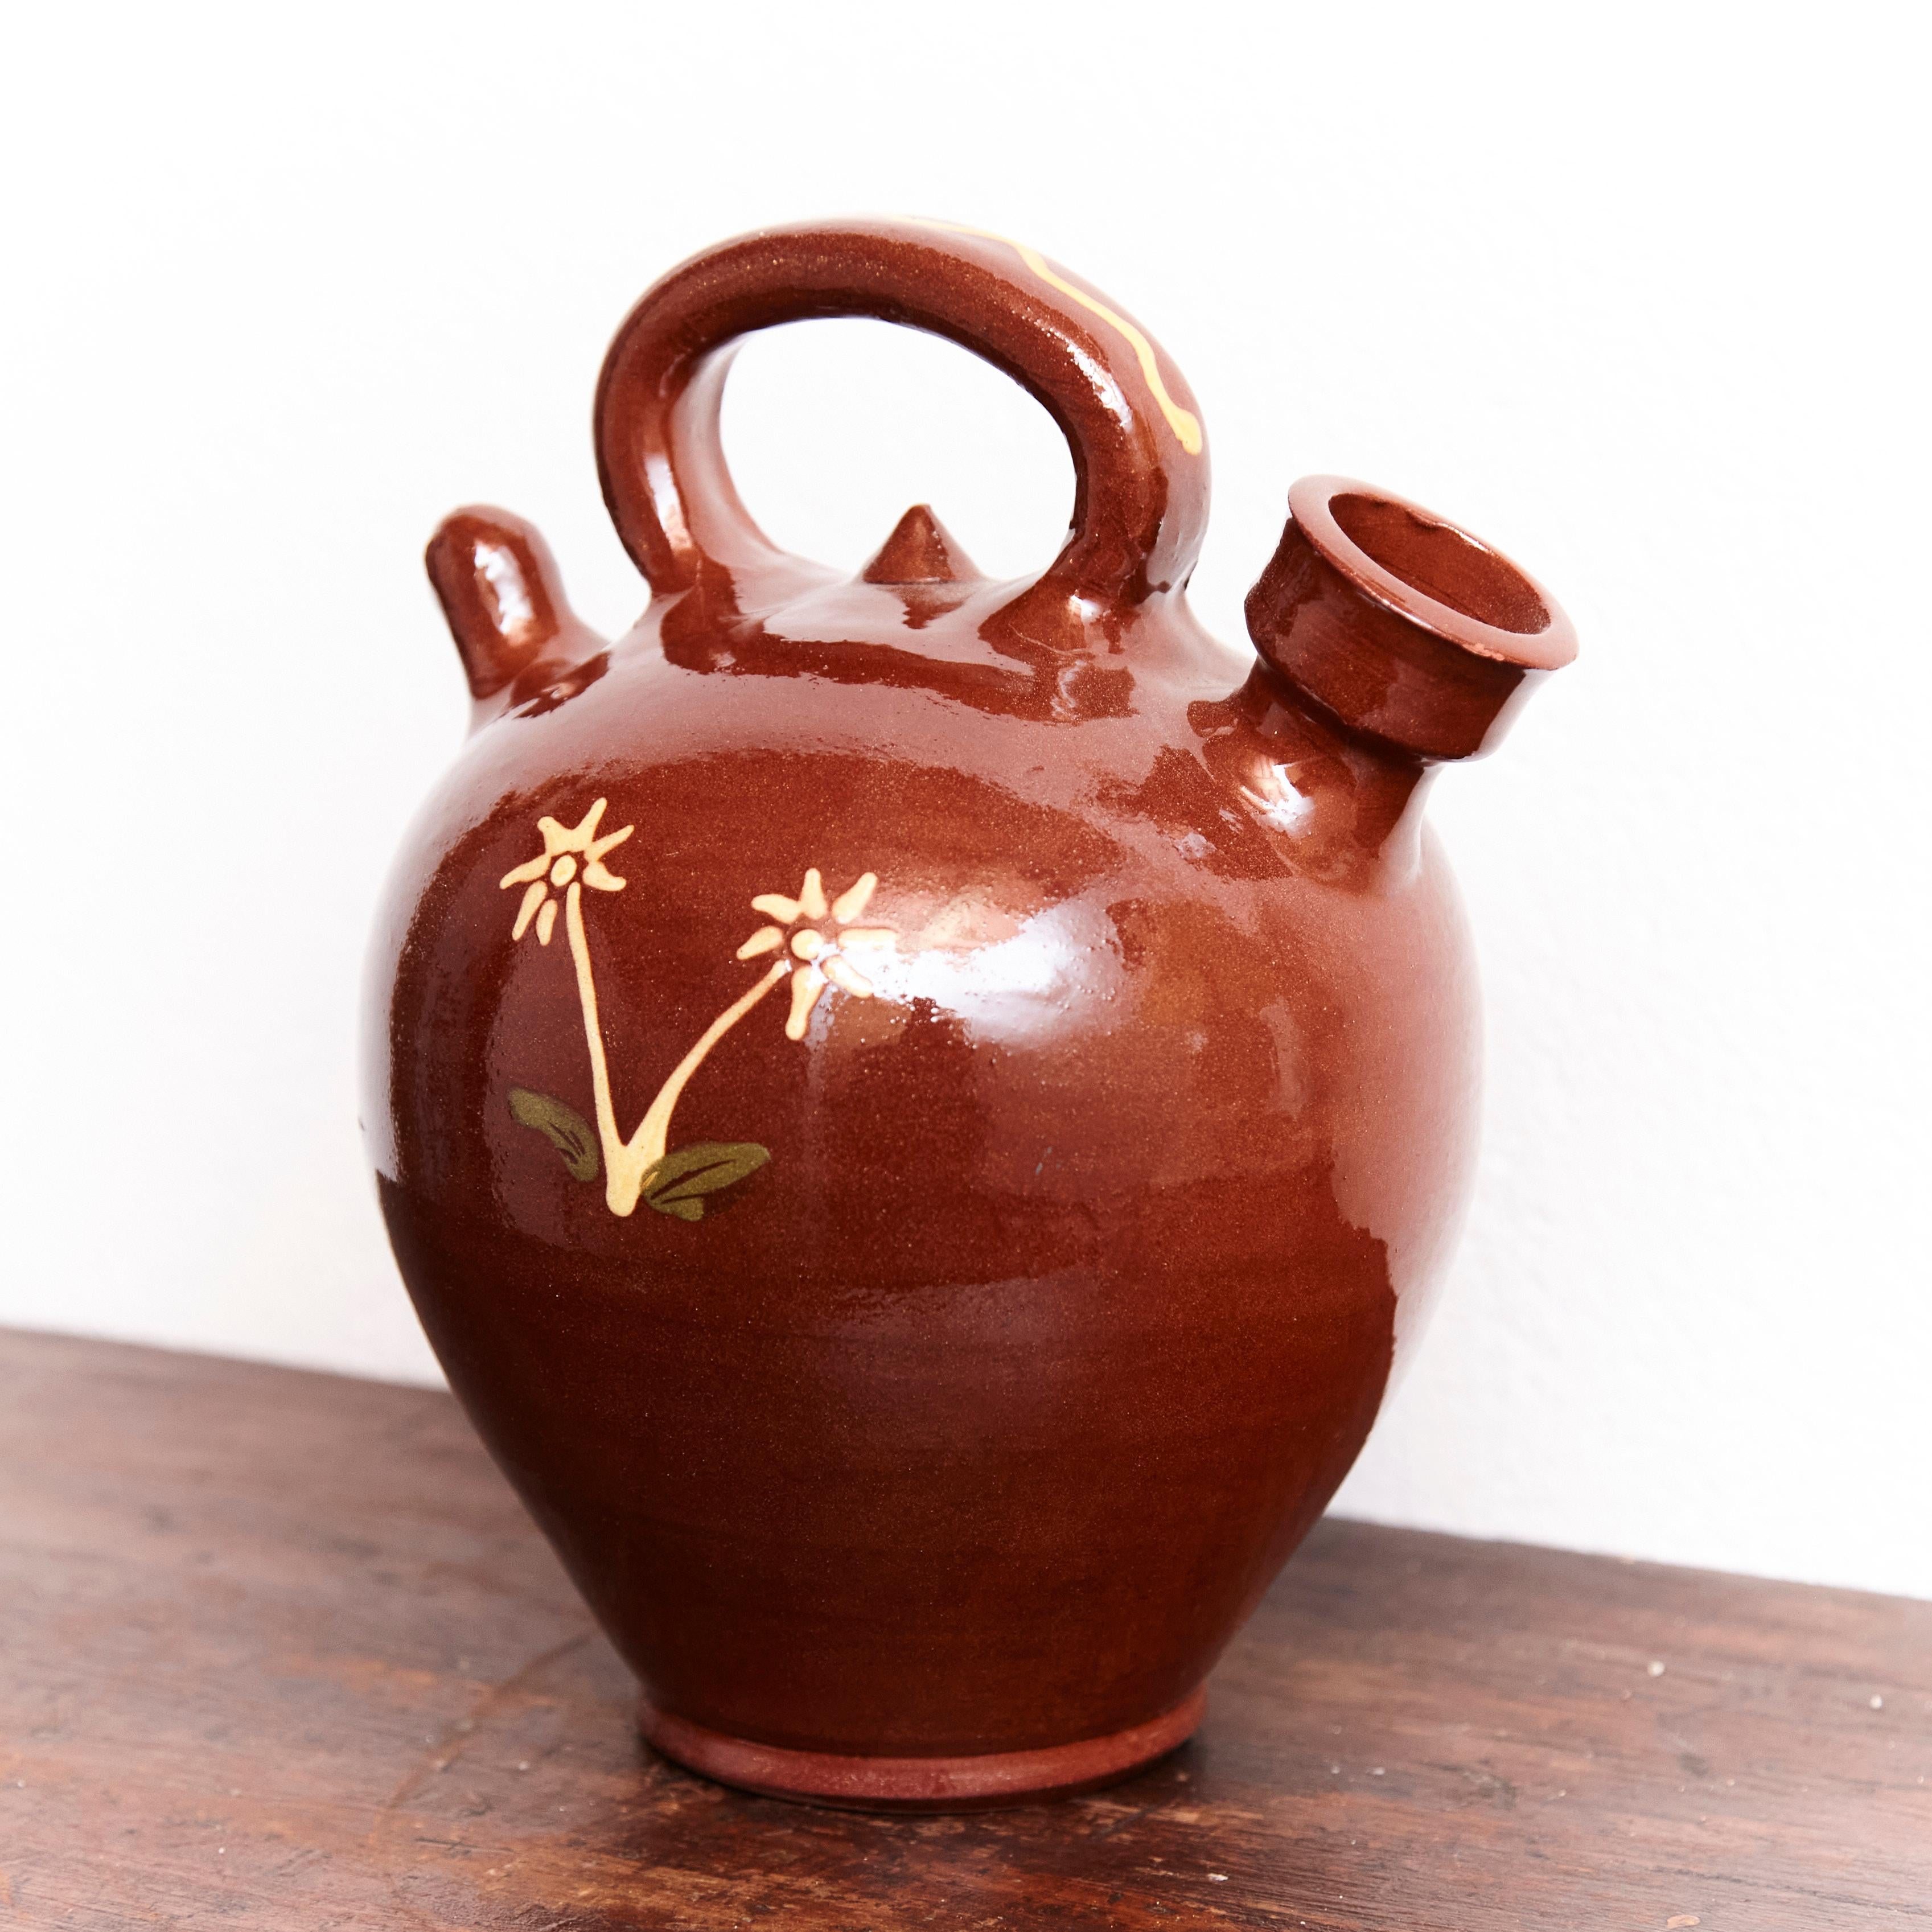 Traditional Spanish jug vase, circa 1960.
Manufactured in Spain.

In original condition, with minor wear consistent of age and use, preserving a beautiul patina.

Material:
Ceramic.